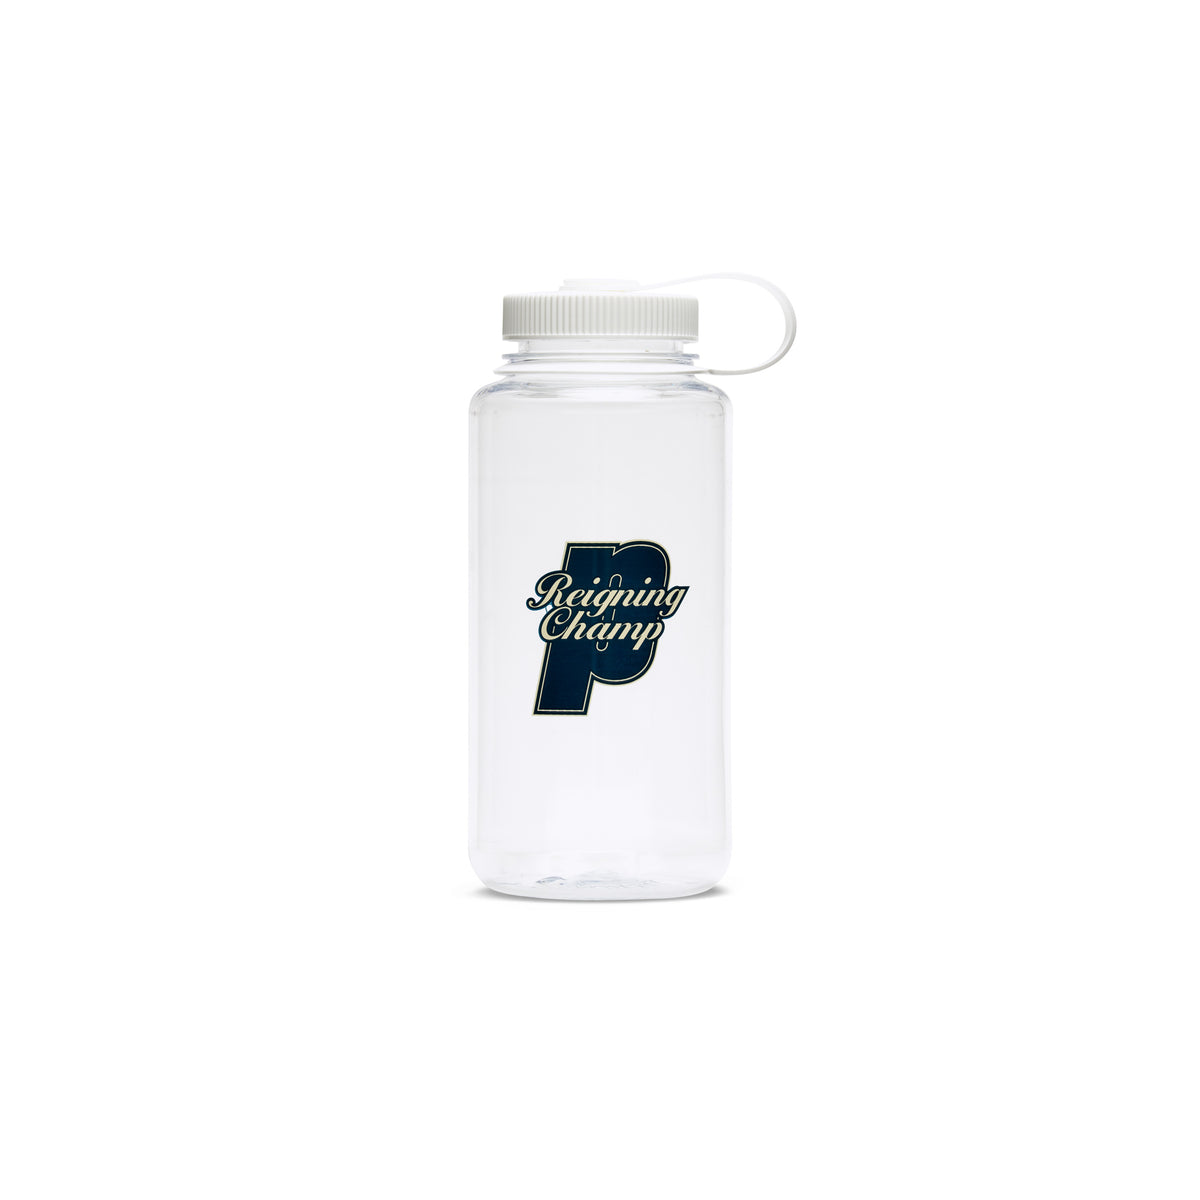 REIGNING CHAMP X PRINCE WATER BOTTLE